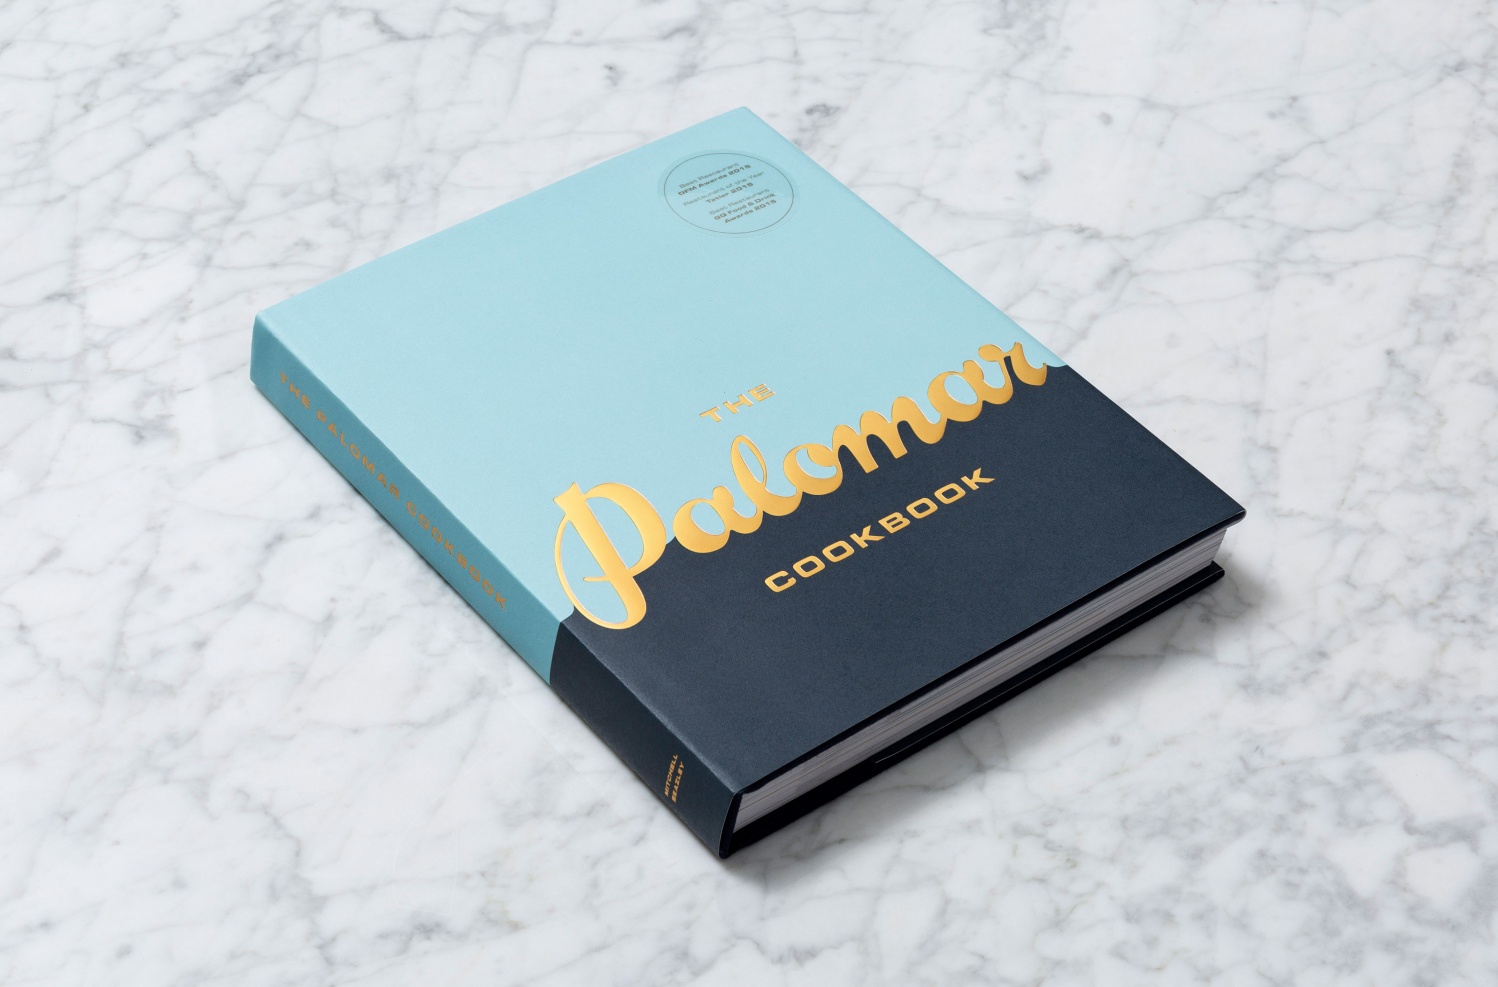 Book Design Inspiration – The Palomar Cookbook by Here, United Kingdom